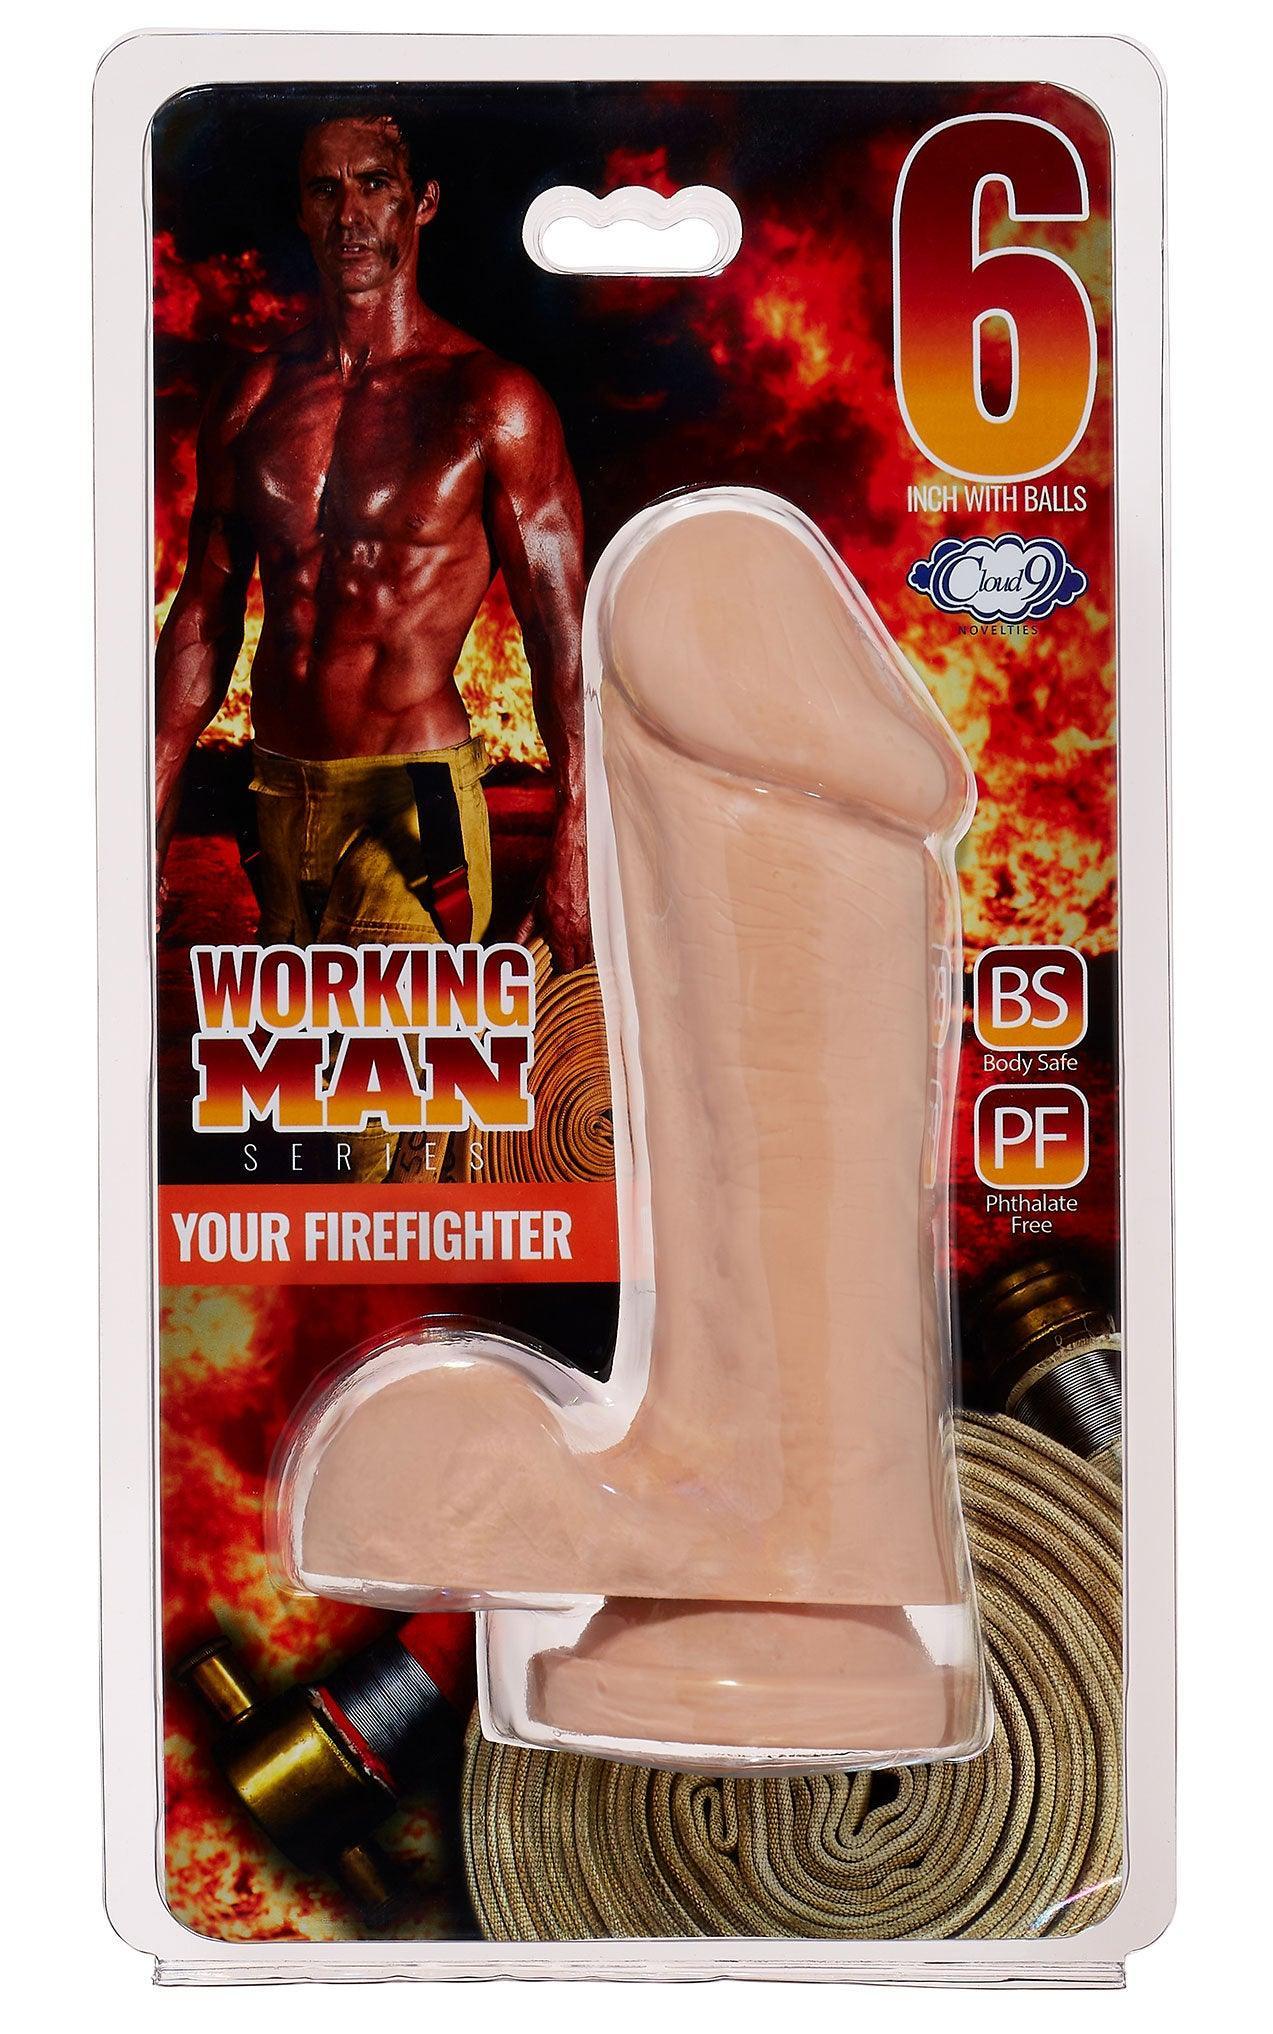 Cloud 9 Working Man 6 Inch With Balls - Your Firefighter - Light - My Sex Toy Hub